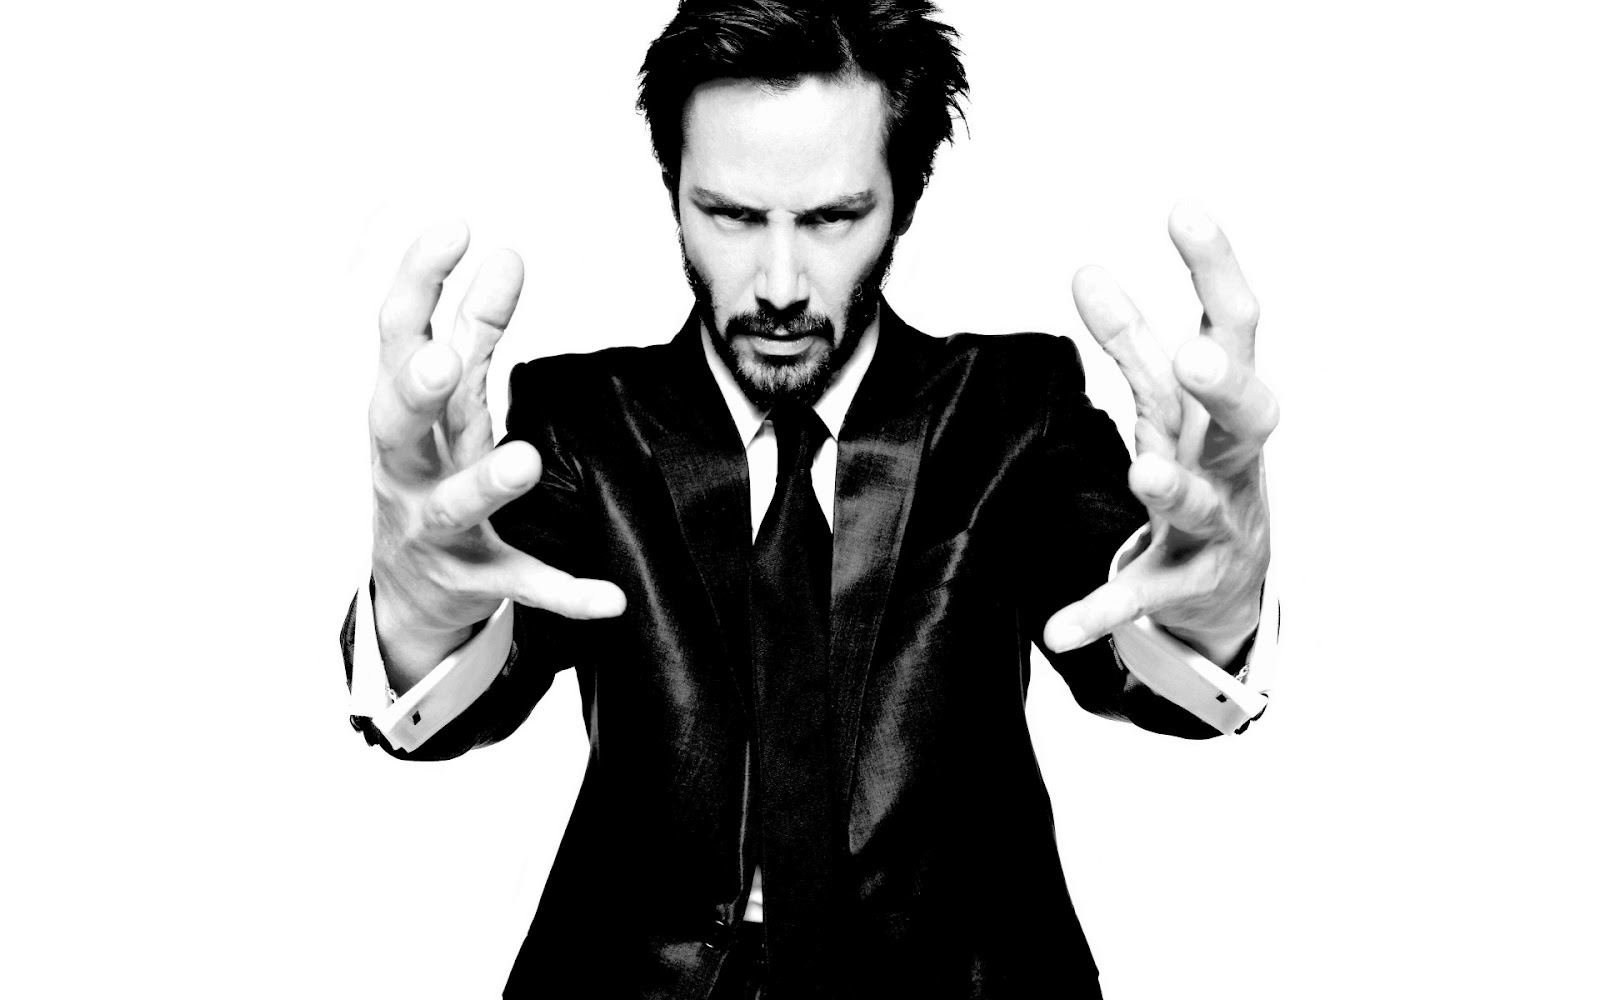 Keanu Reeves With Beard And Suit Black White Photo HD Wallpaper